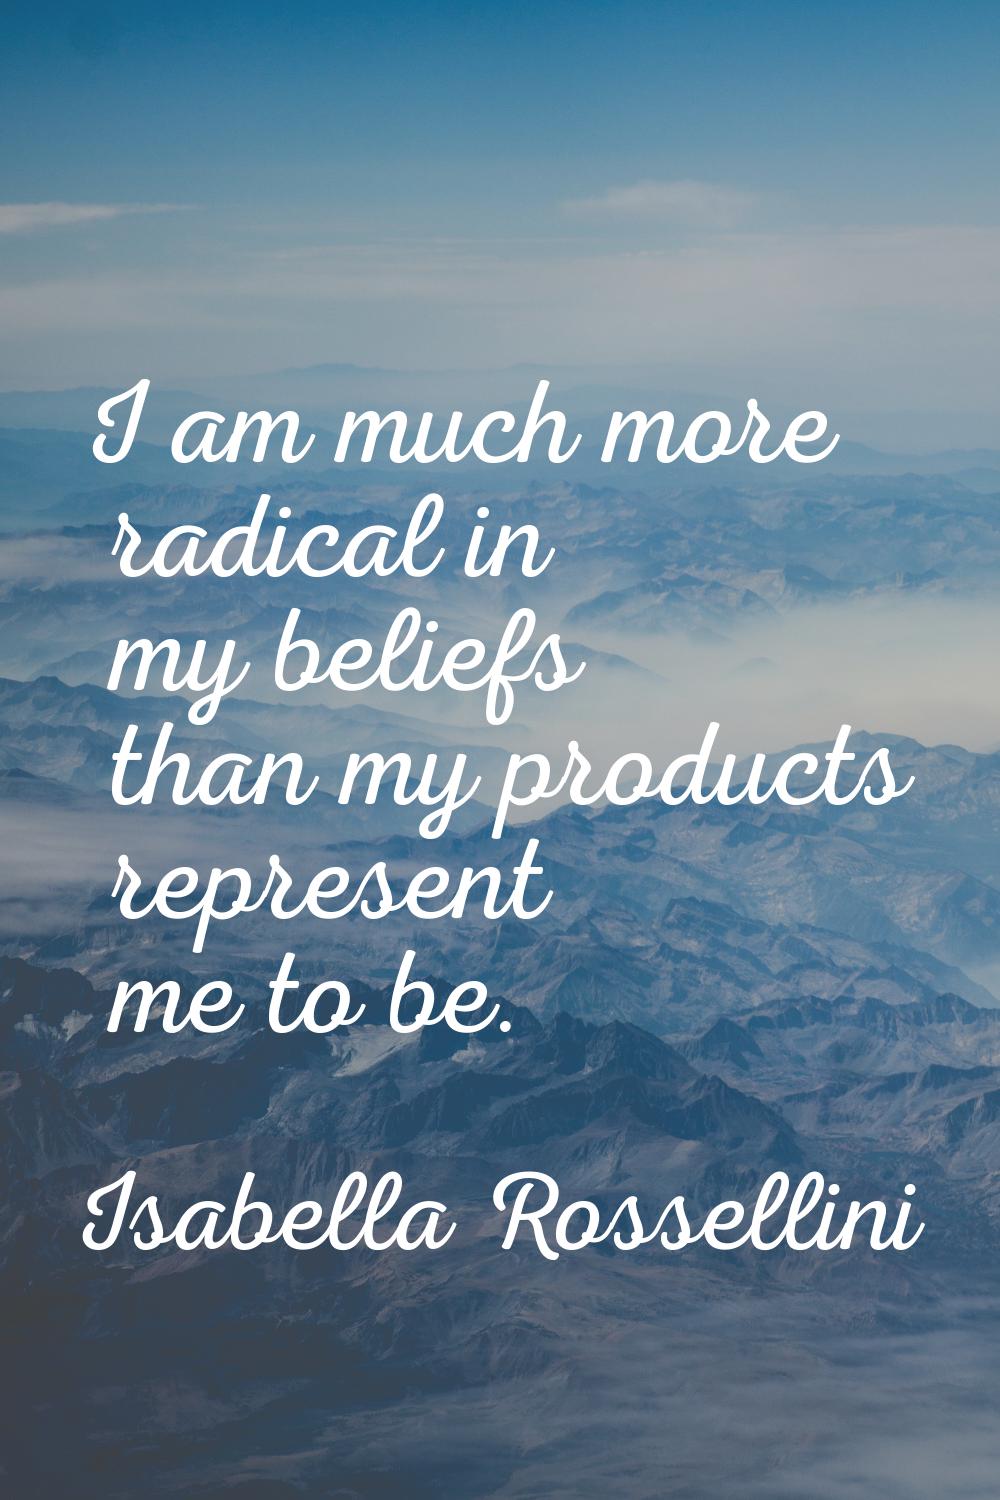 I am much more radical in my beliefs than my products represent me to be.